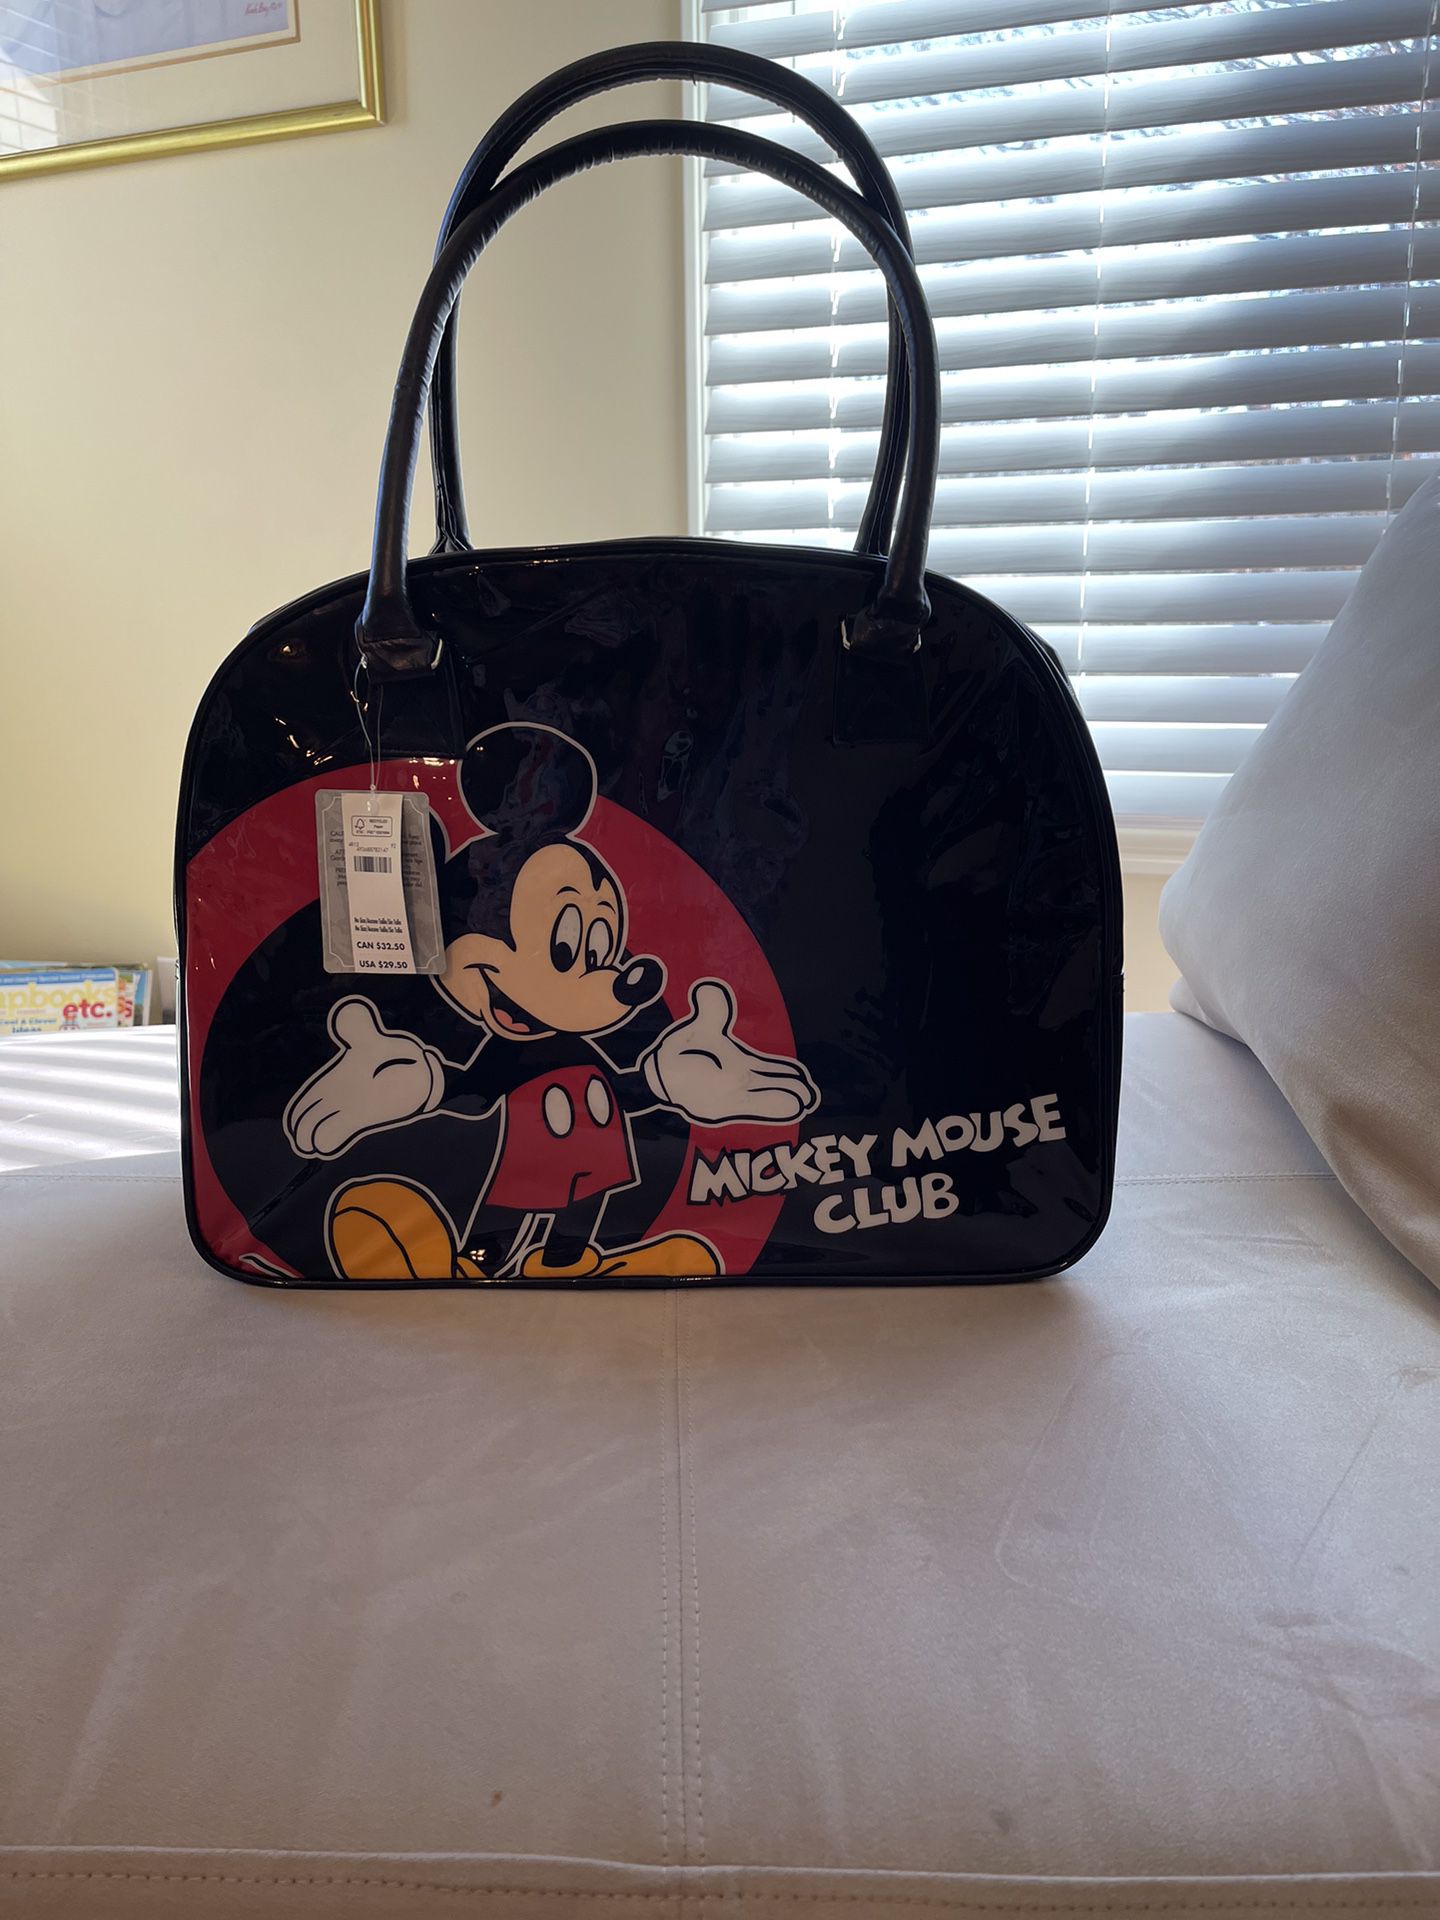 Mickey Mouse Club Bag